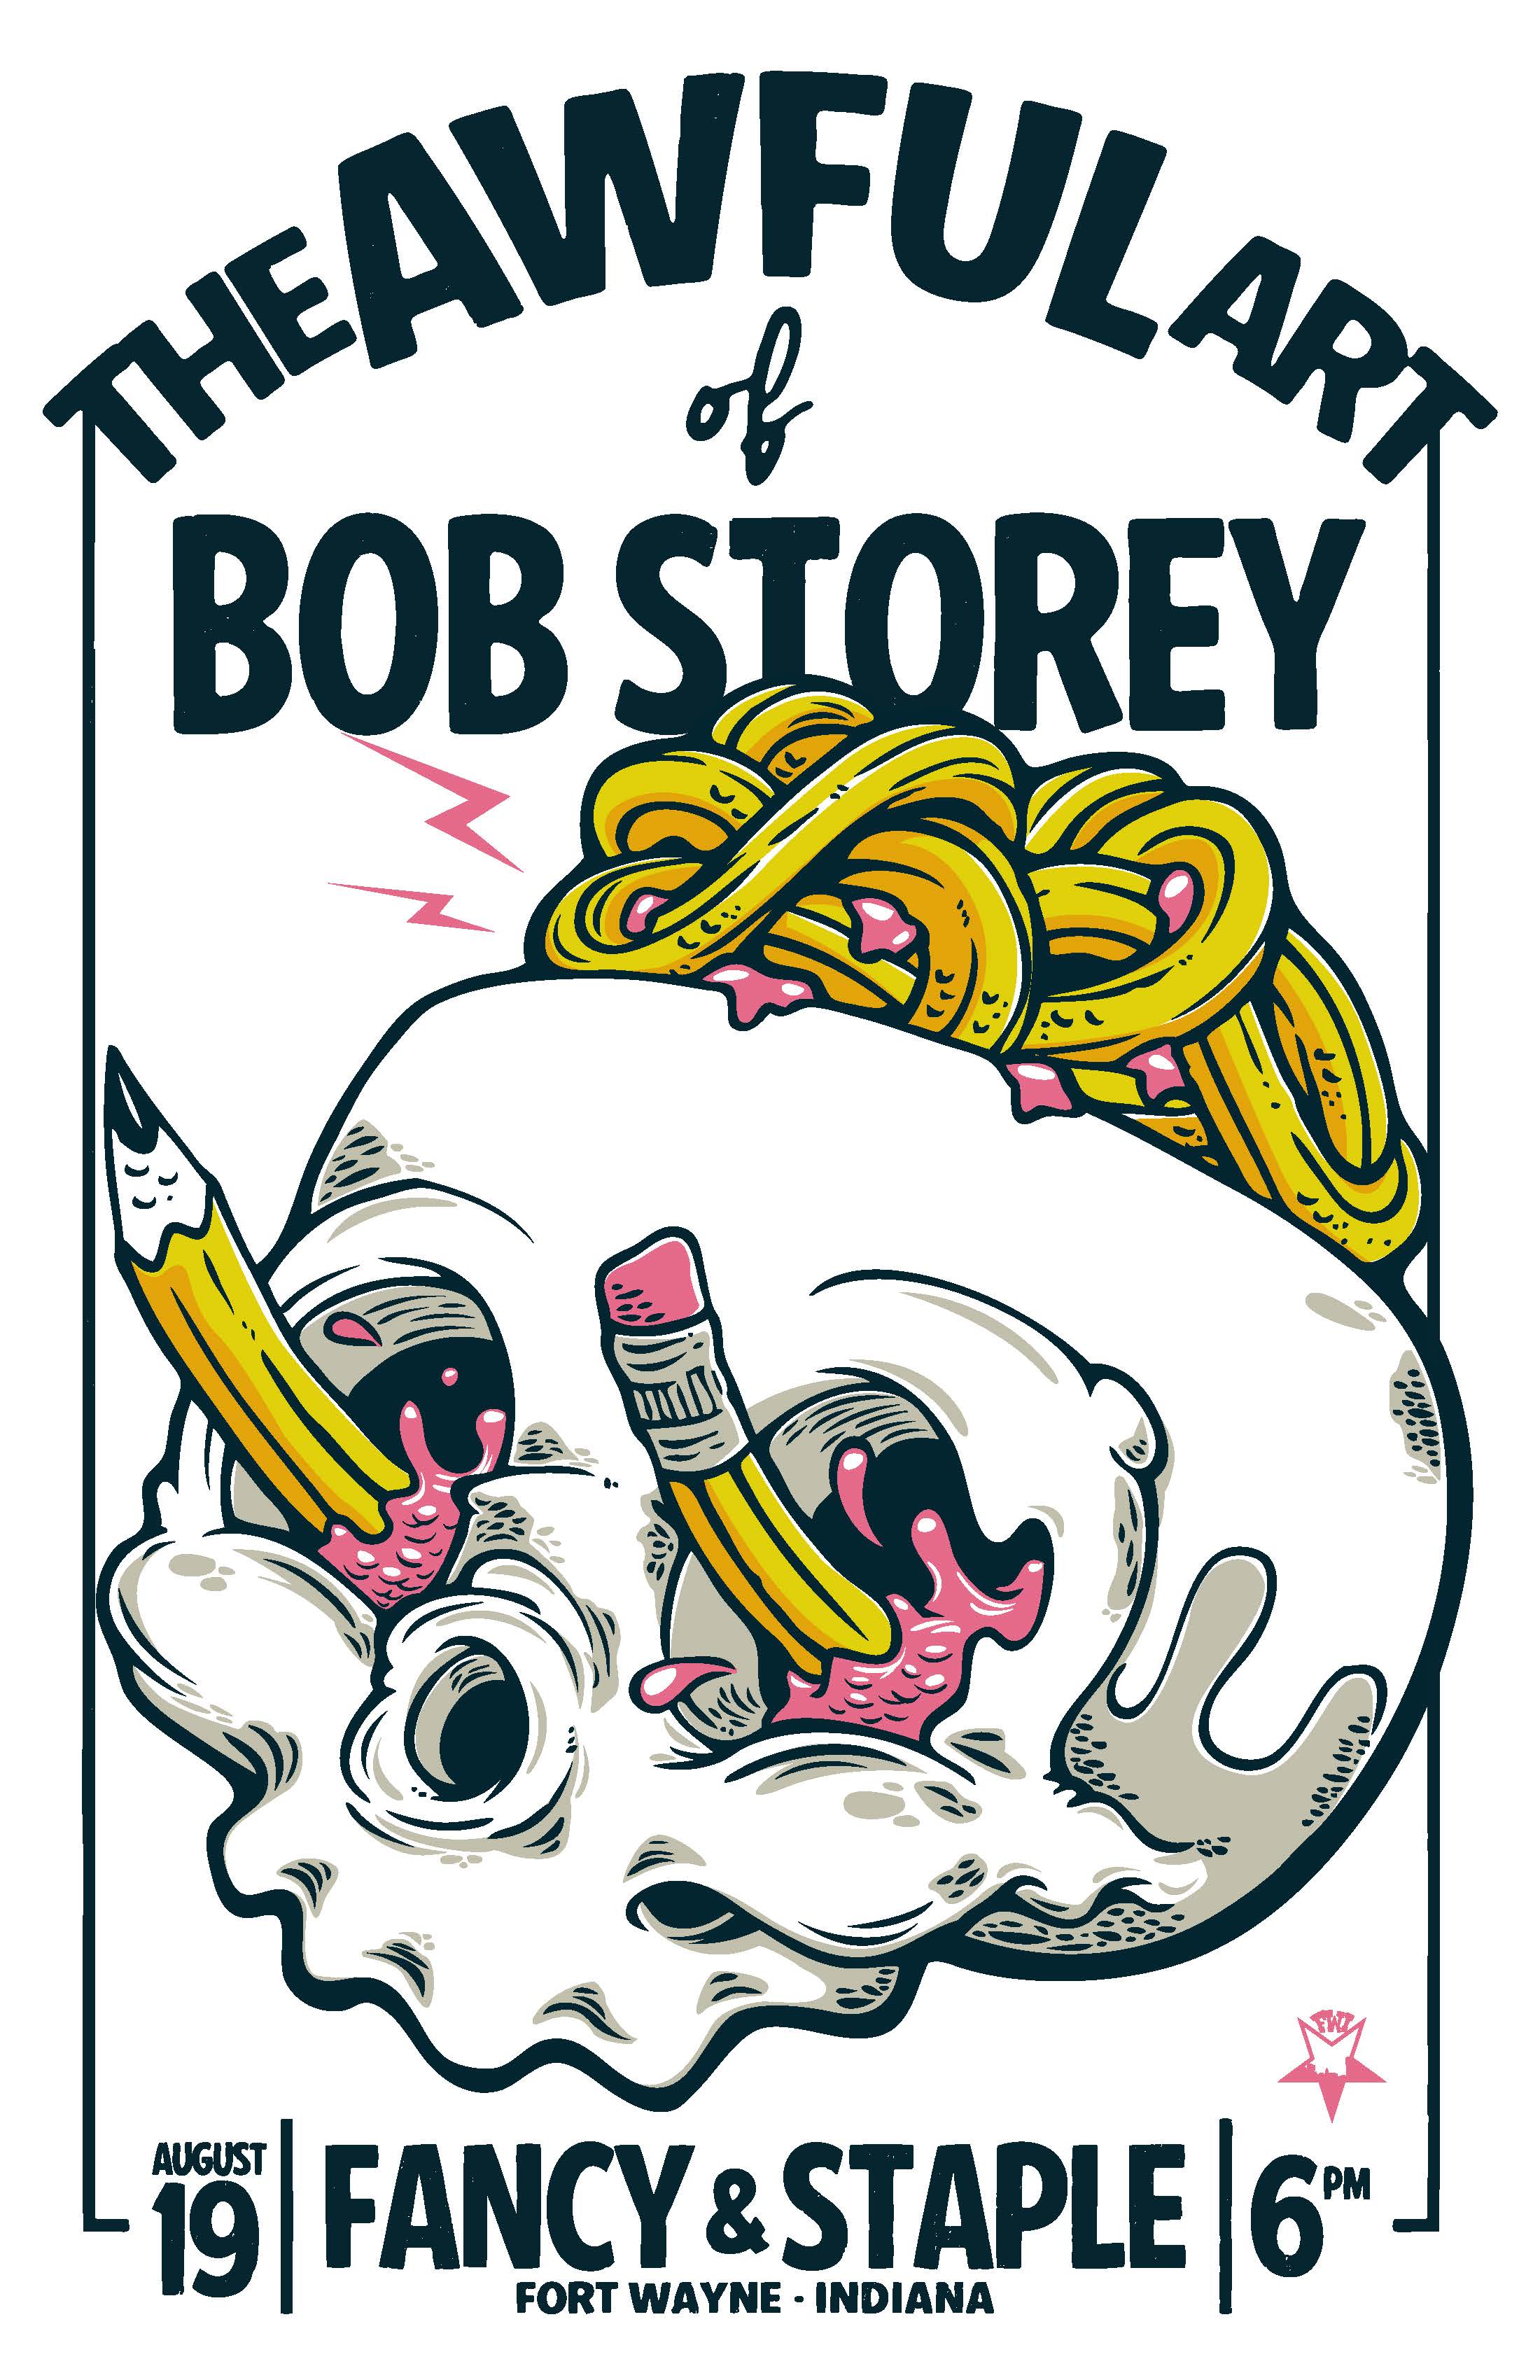 BOBSTOREYS AWFUL POSTER 2 (1)